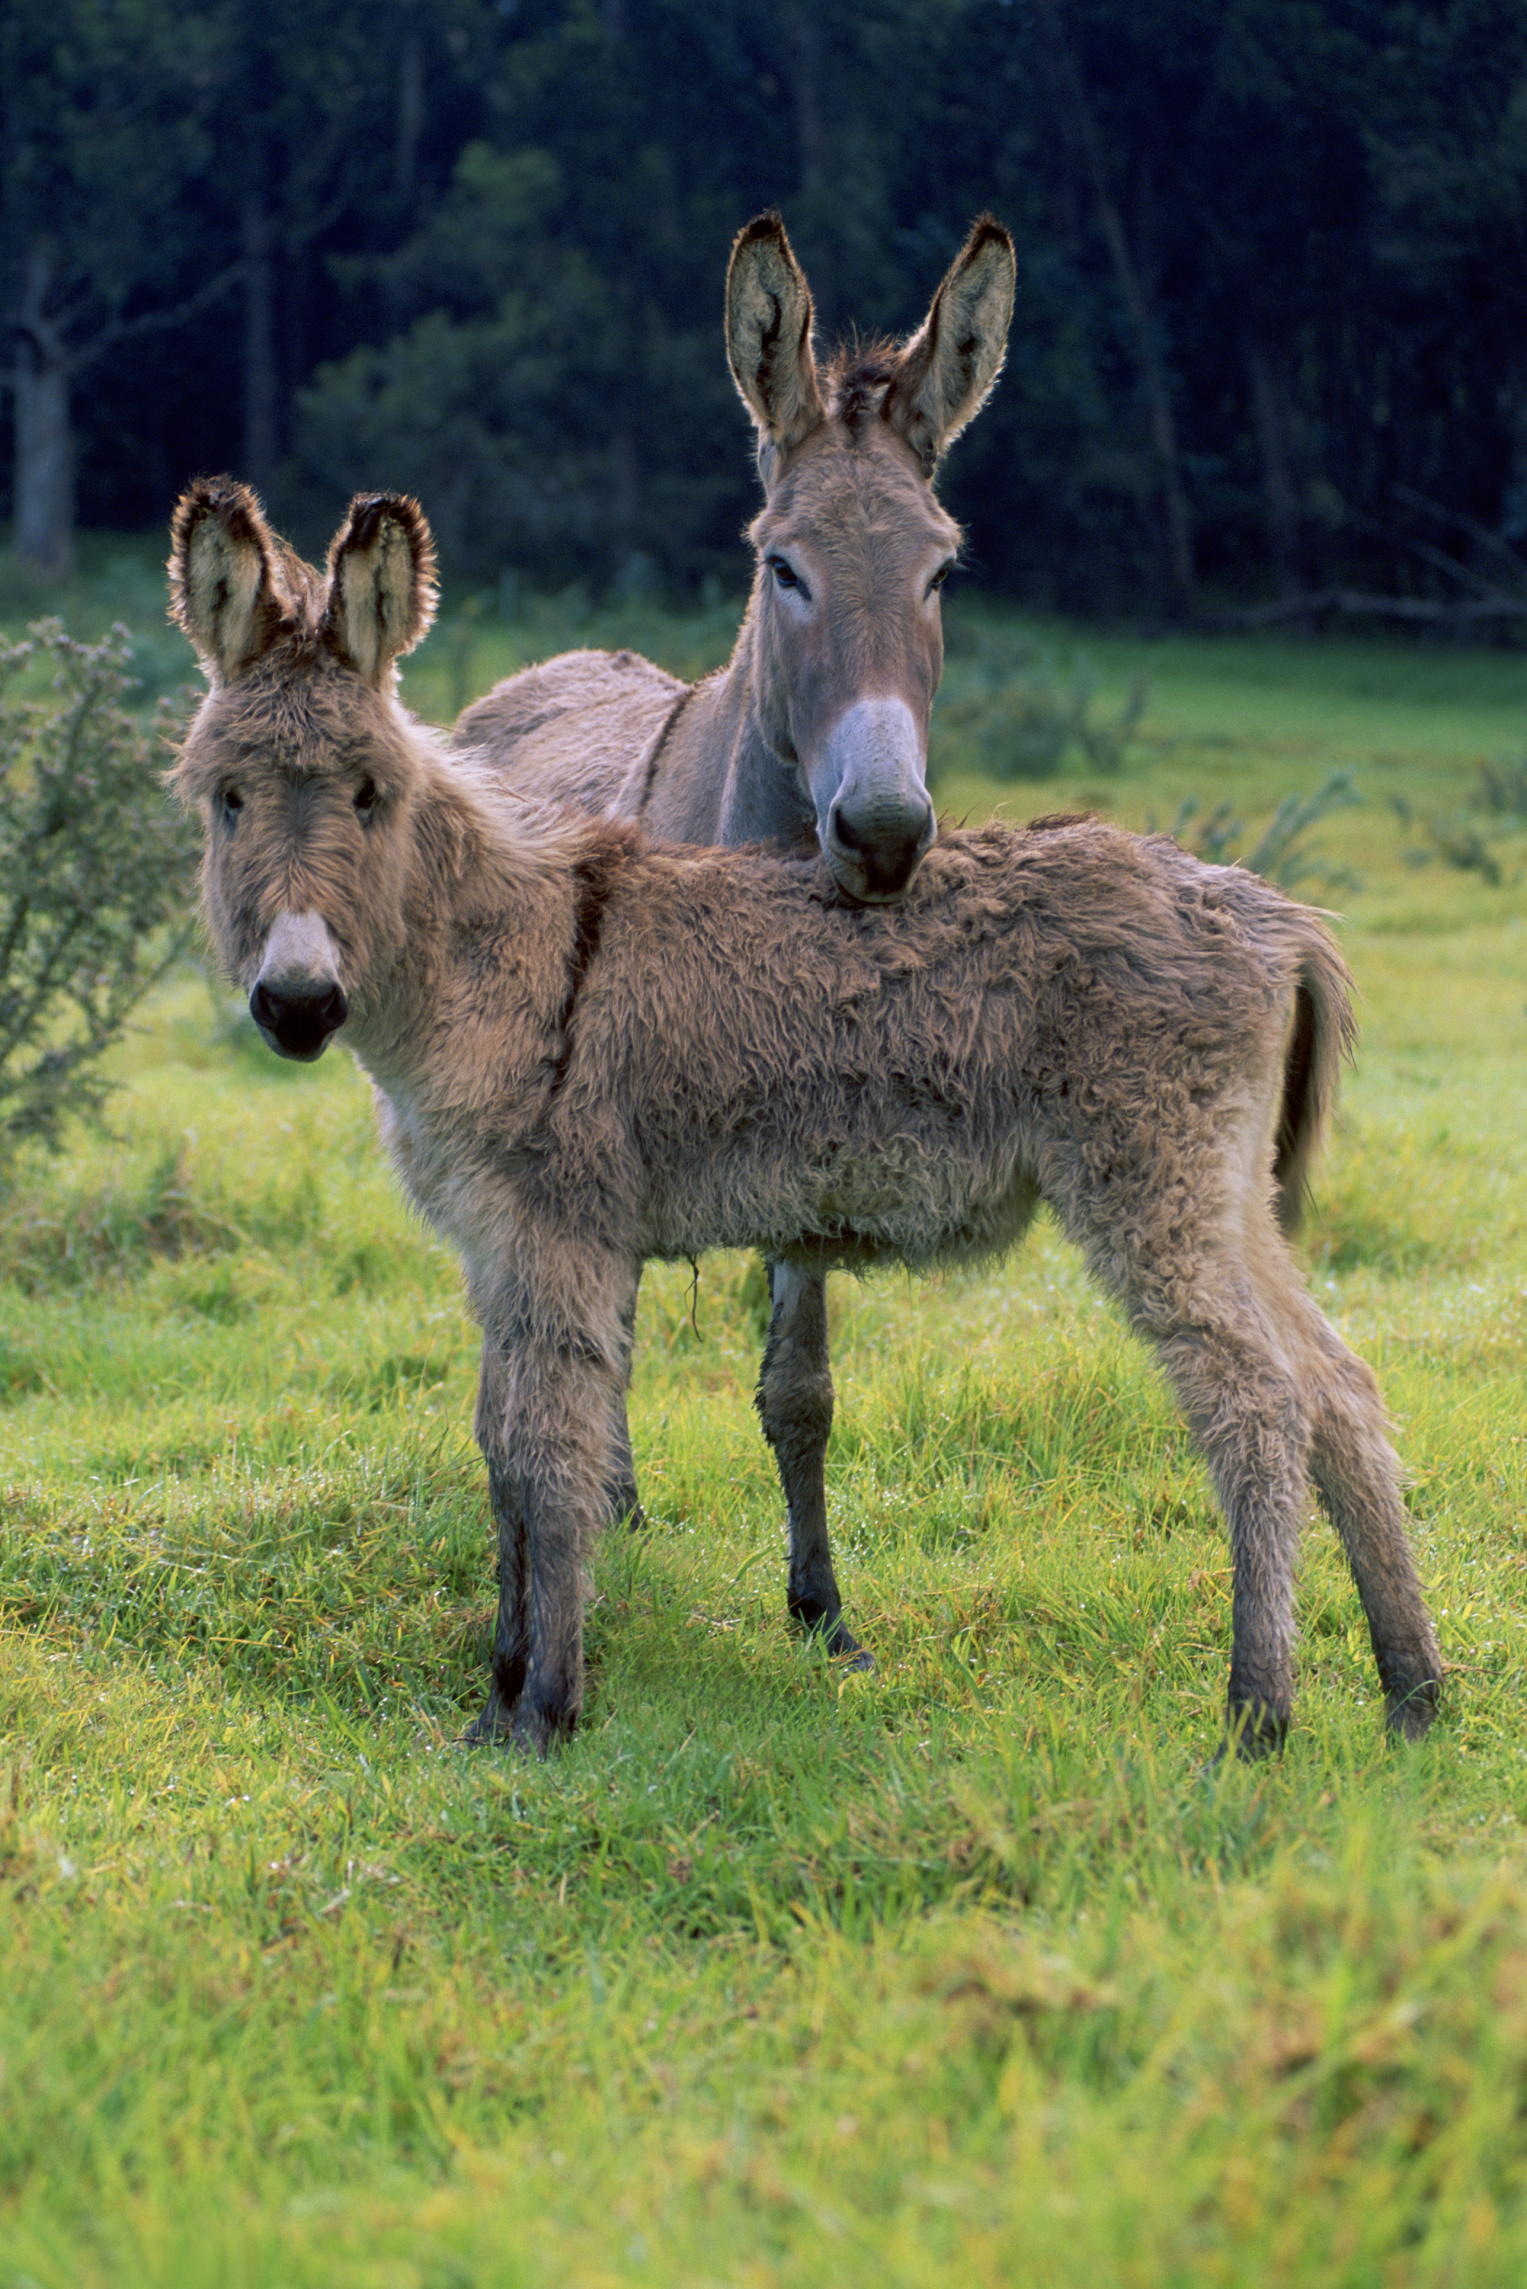 How to Care for a Baby Donkey | Animals - mom.me